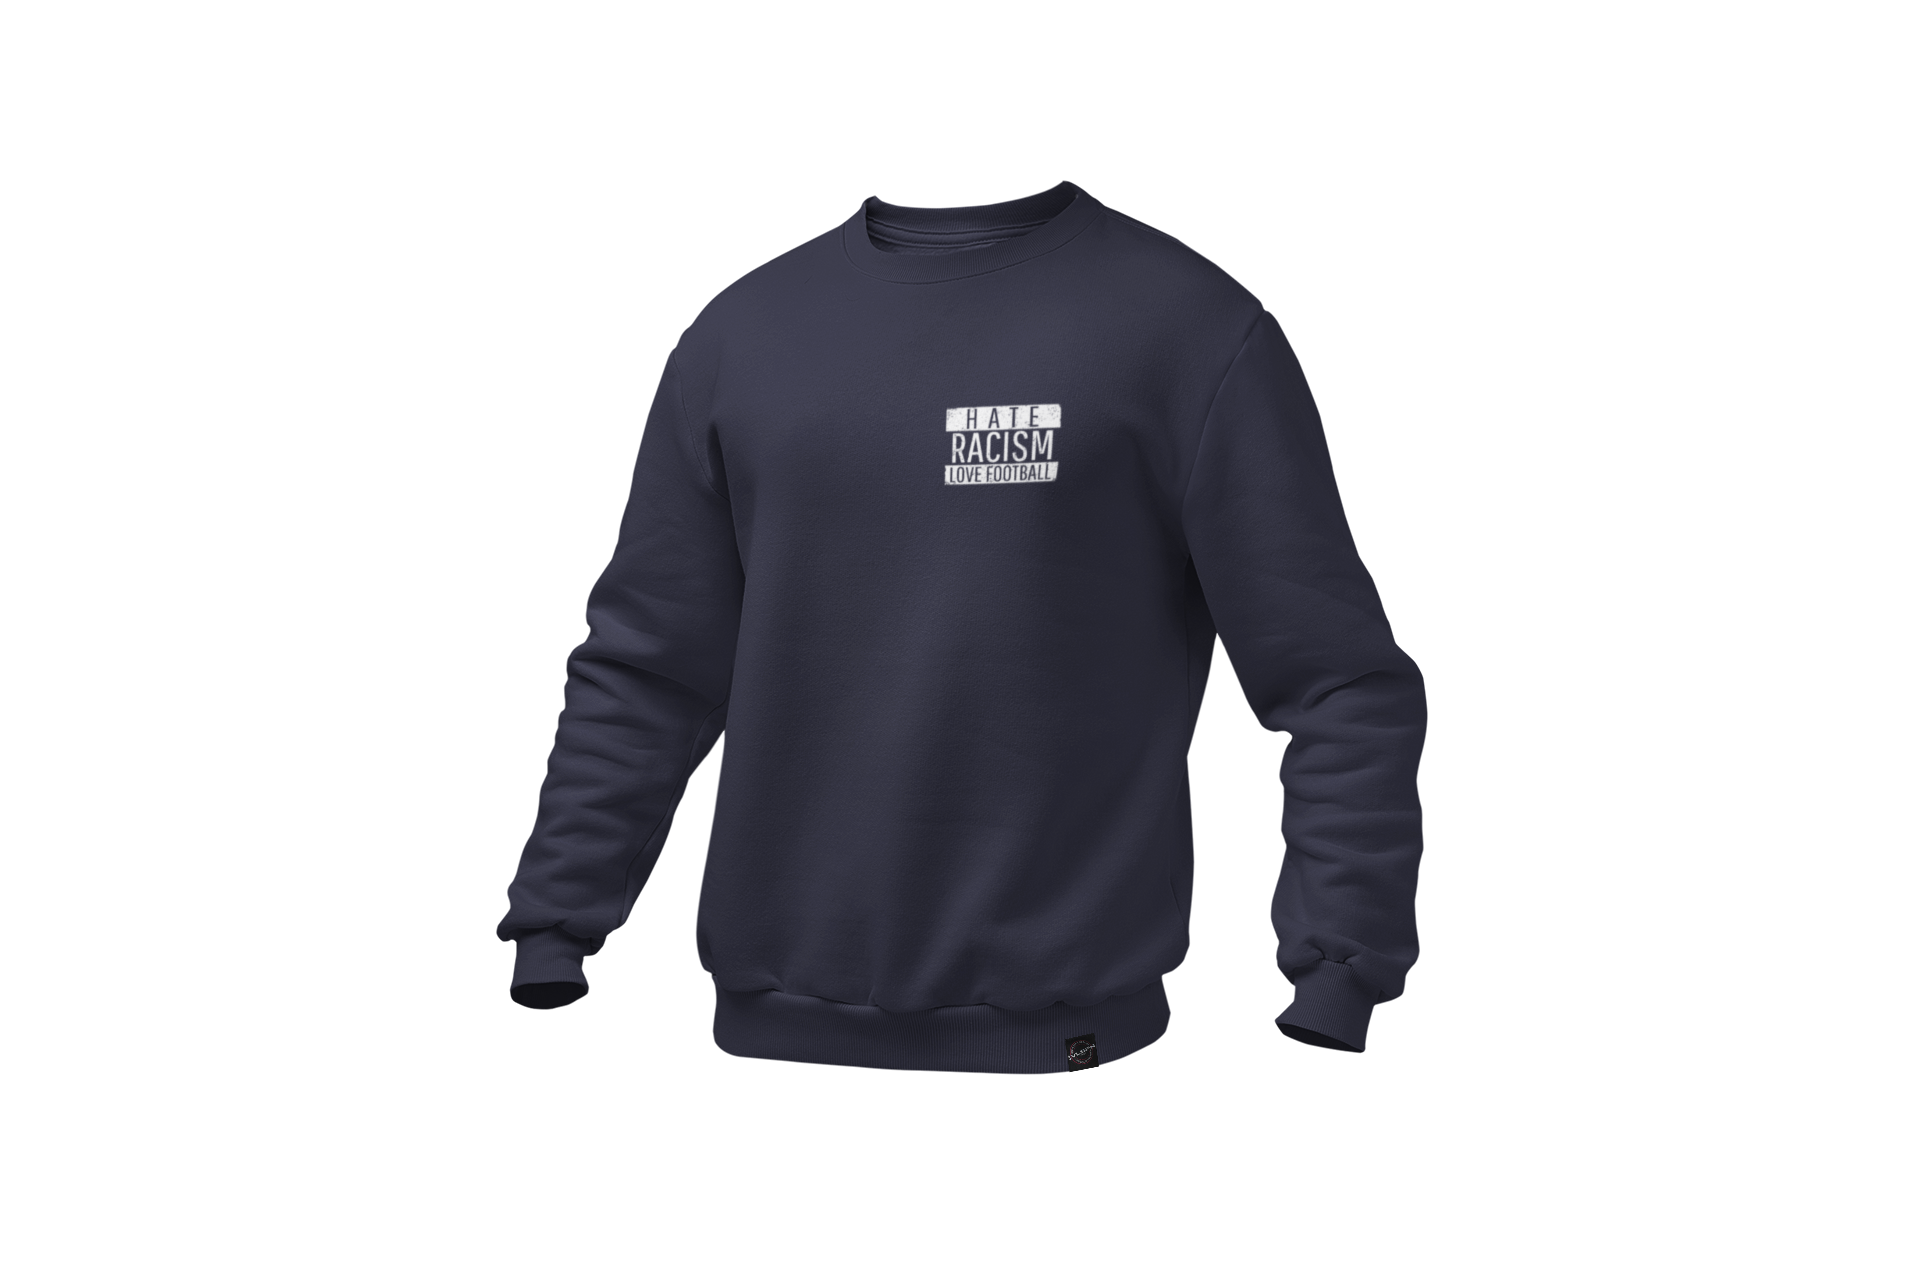 mockup-of-a-ghosted-crewneck-sweatshirt-over-a-solid-background-26960 - 2021-04-07T192230.404.png